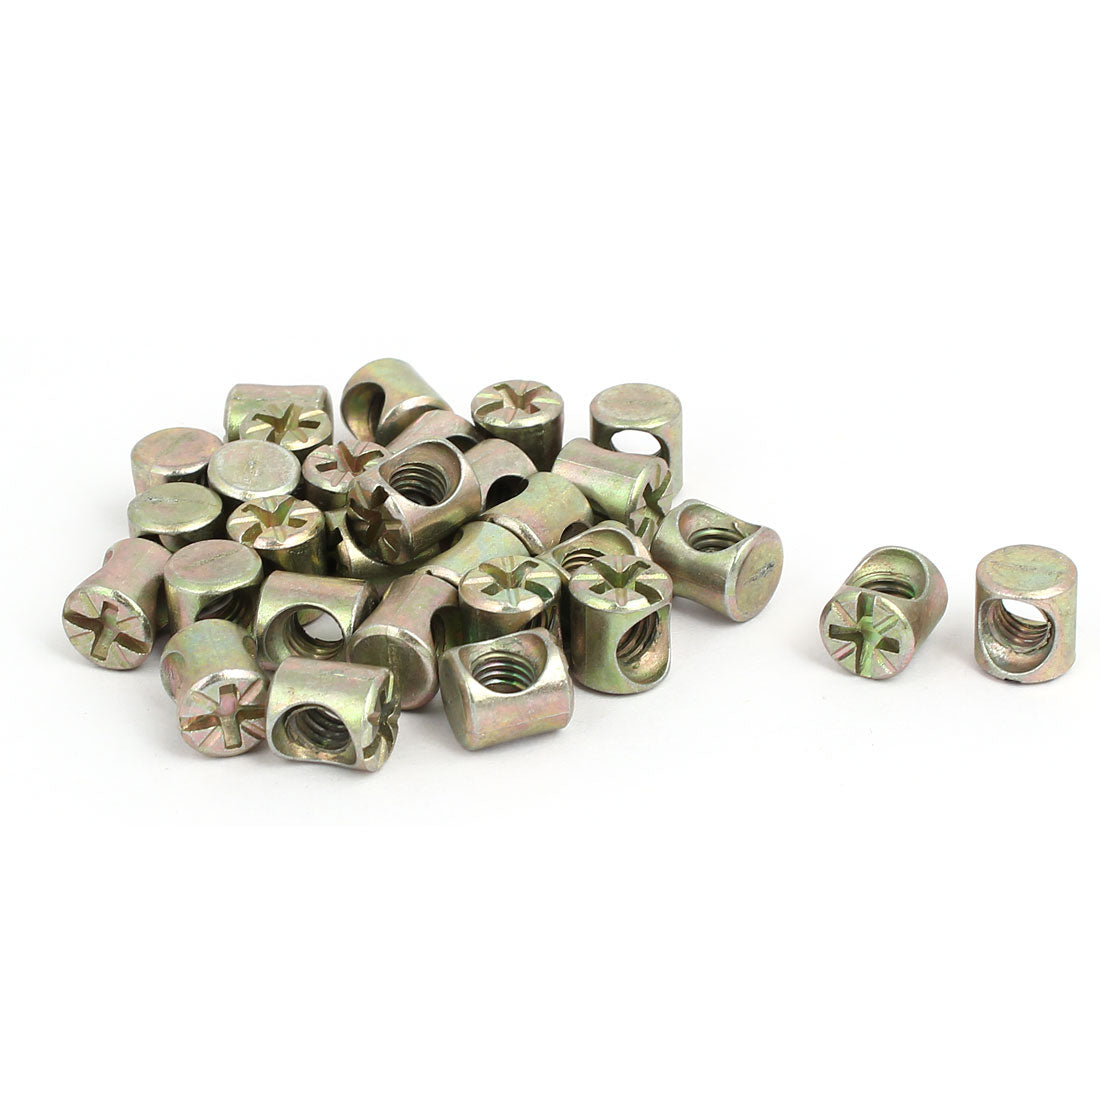 uxcell Uxcell M6 x 10mm Cross Dowel Slotted Metal Barrel Nuts 30PCS for Furniture Bed Chair